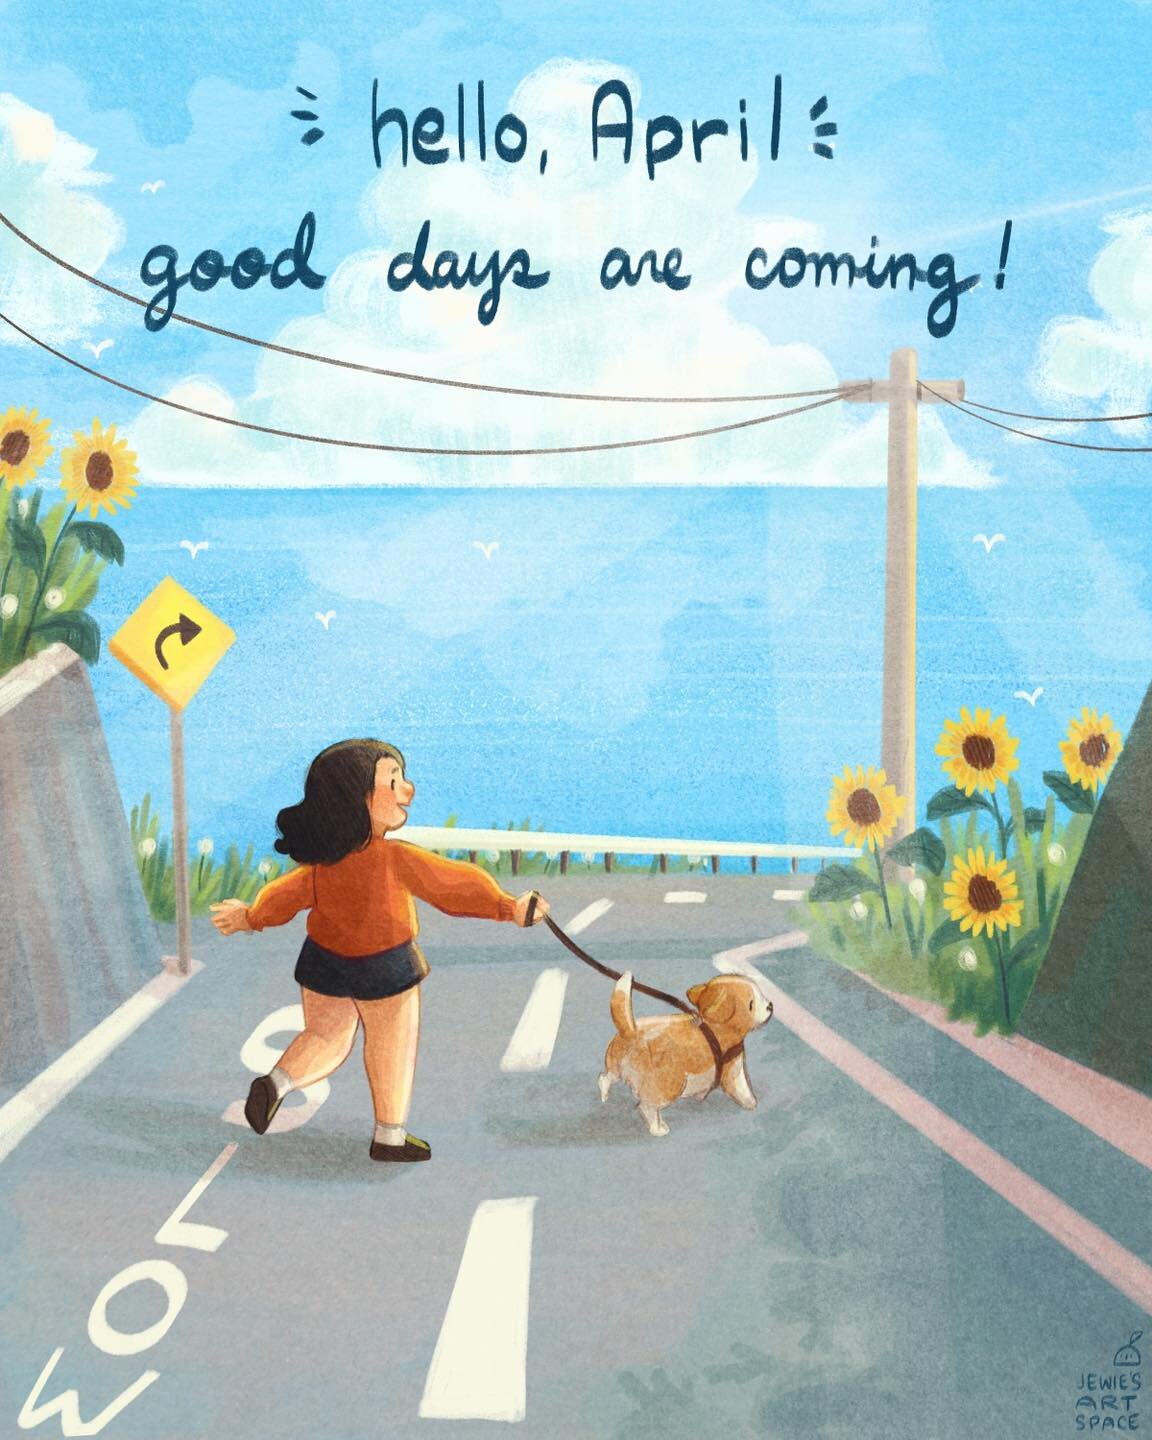 Hello, April! 

Entering April is always a good time. 🥰💛

We&rsquo;re looking forward to this months fresh blessings and goodness! 🌻

#helloapril #april #art #artwork #artist #draw #drawing #digitalart #digitalartwork #illustration #illustrator